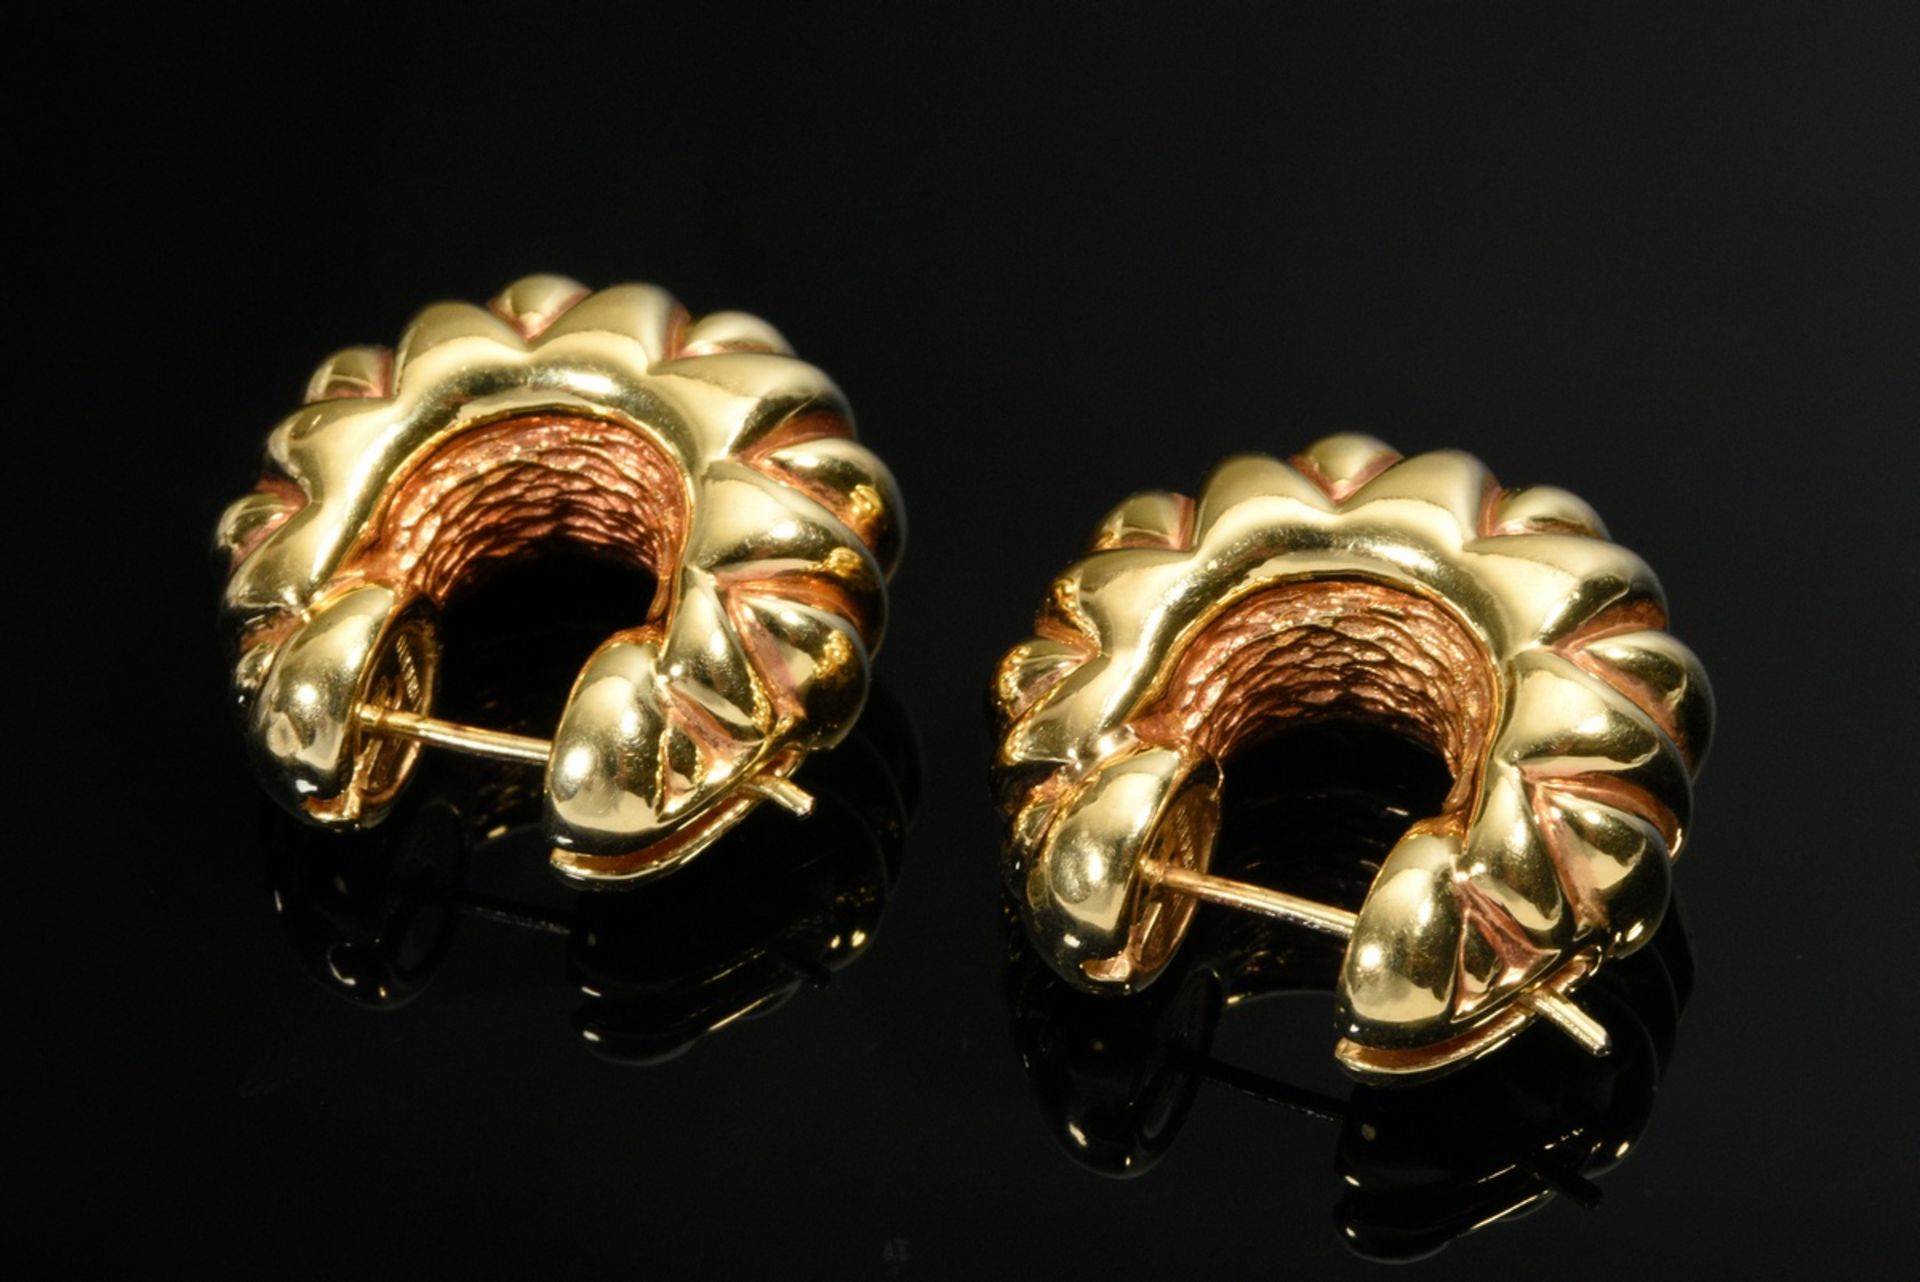 Pair of Chimento yellow gold 750 stud earrings, Italy, 8.5g, Ø 2.5cm, small dents - Image 2 of 2